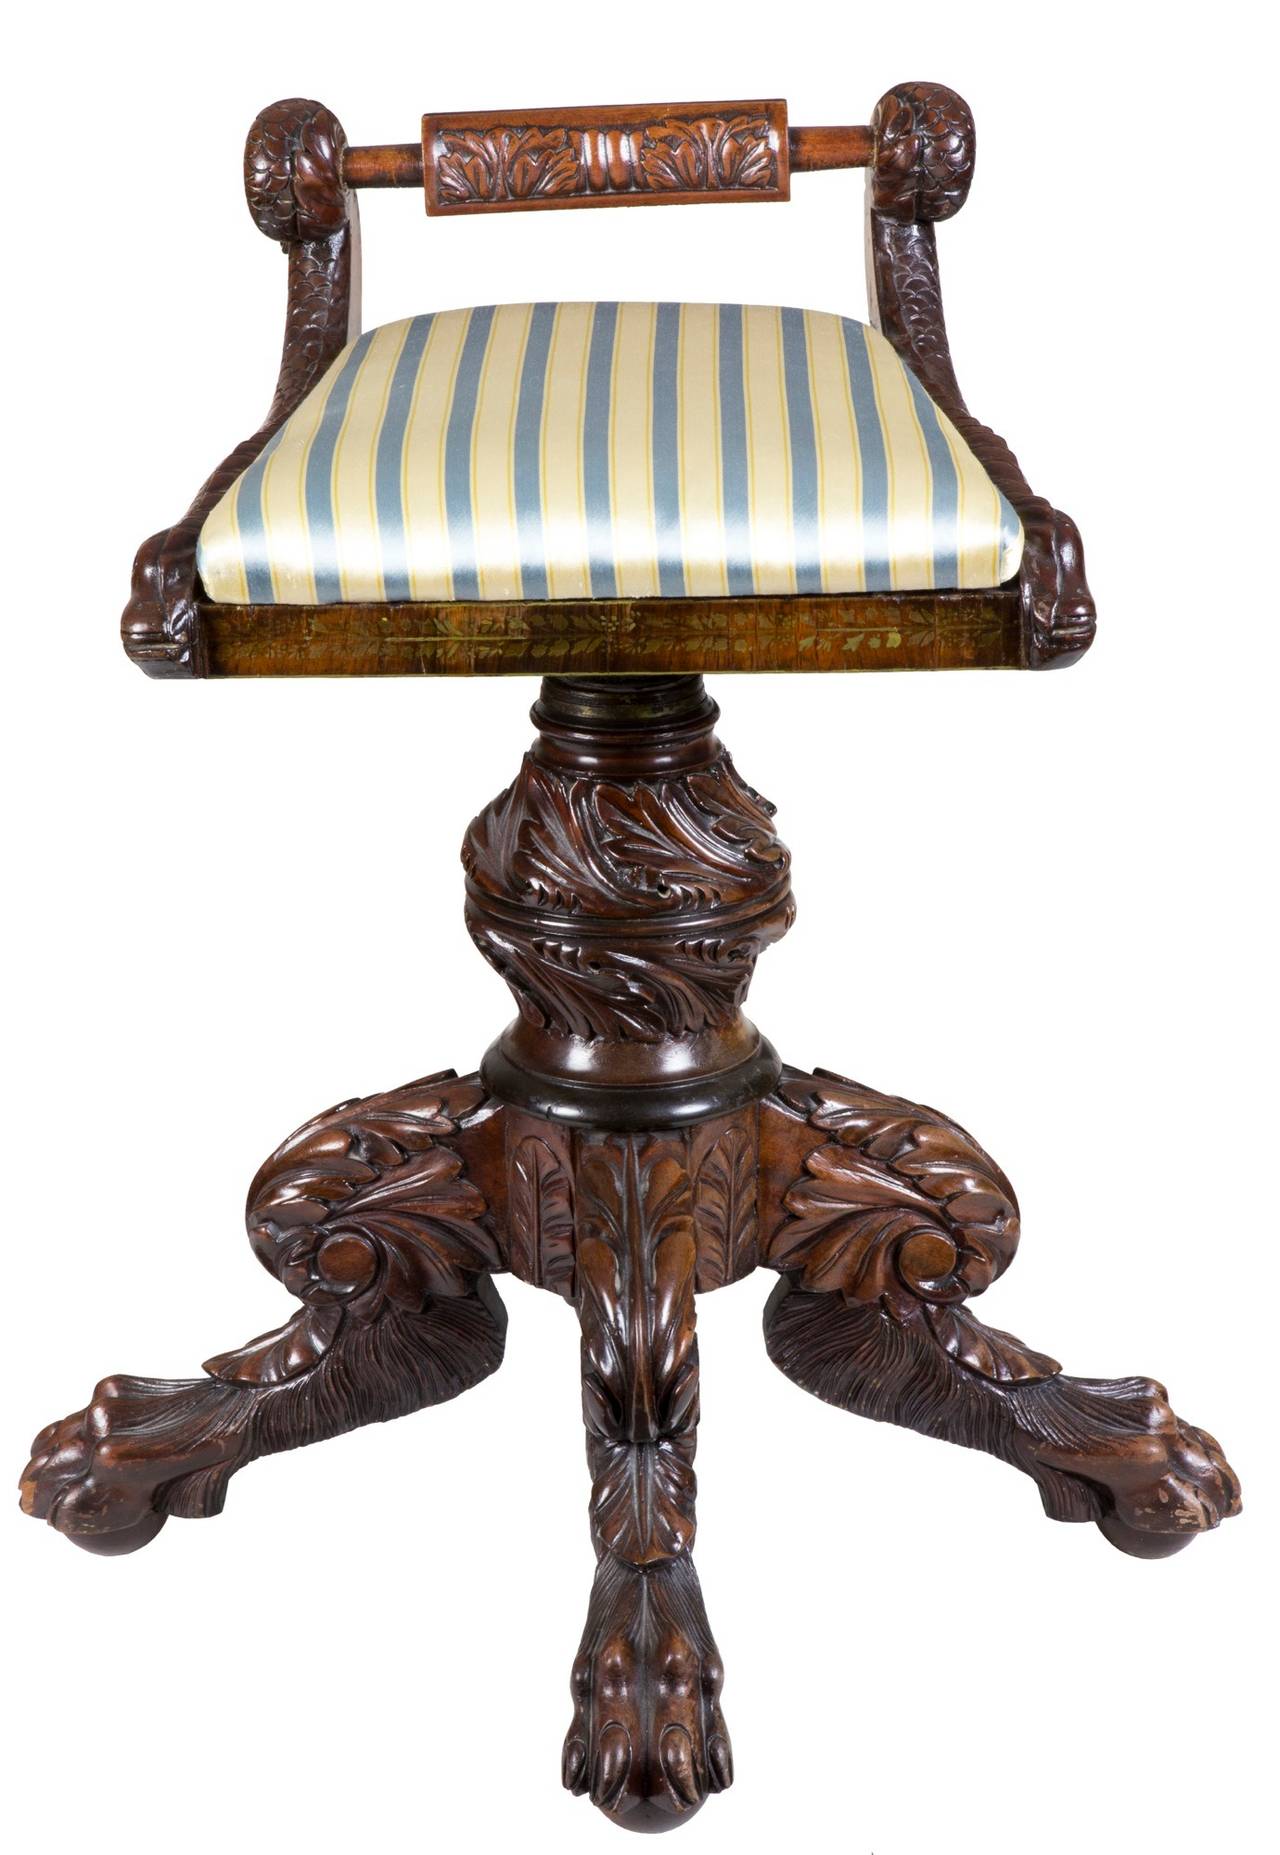 Piano stools took a lot of use and very few have survived intact as this one has. The carving throughout is the best. It’s deep and well-conceived, particularly the main column and acanthus carving in heroic depth. This stool remains in original